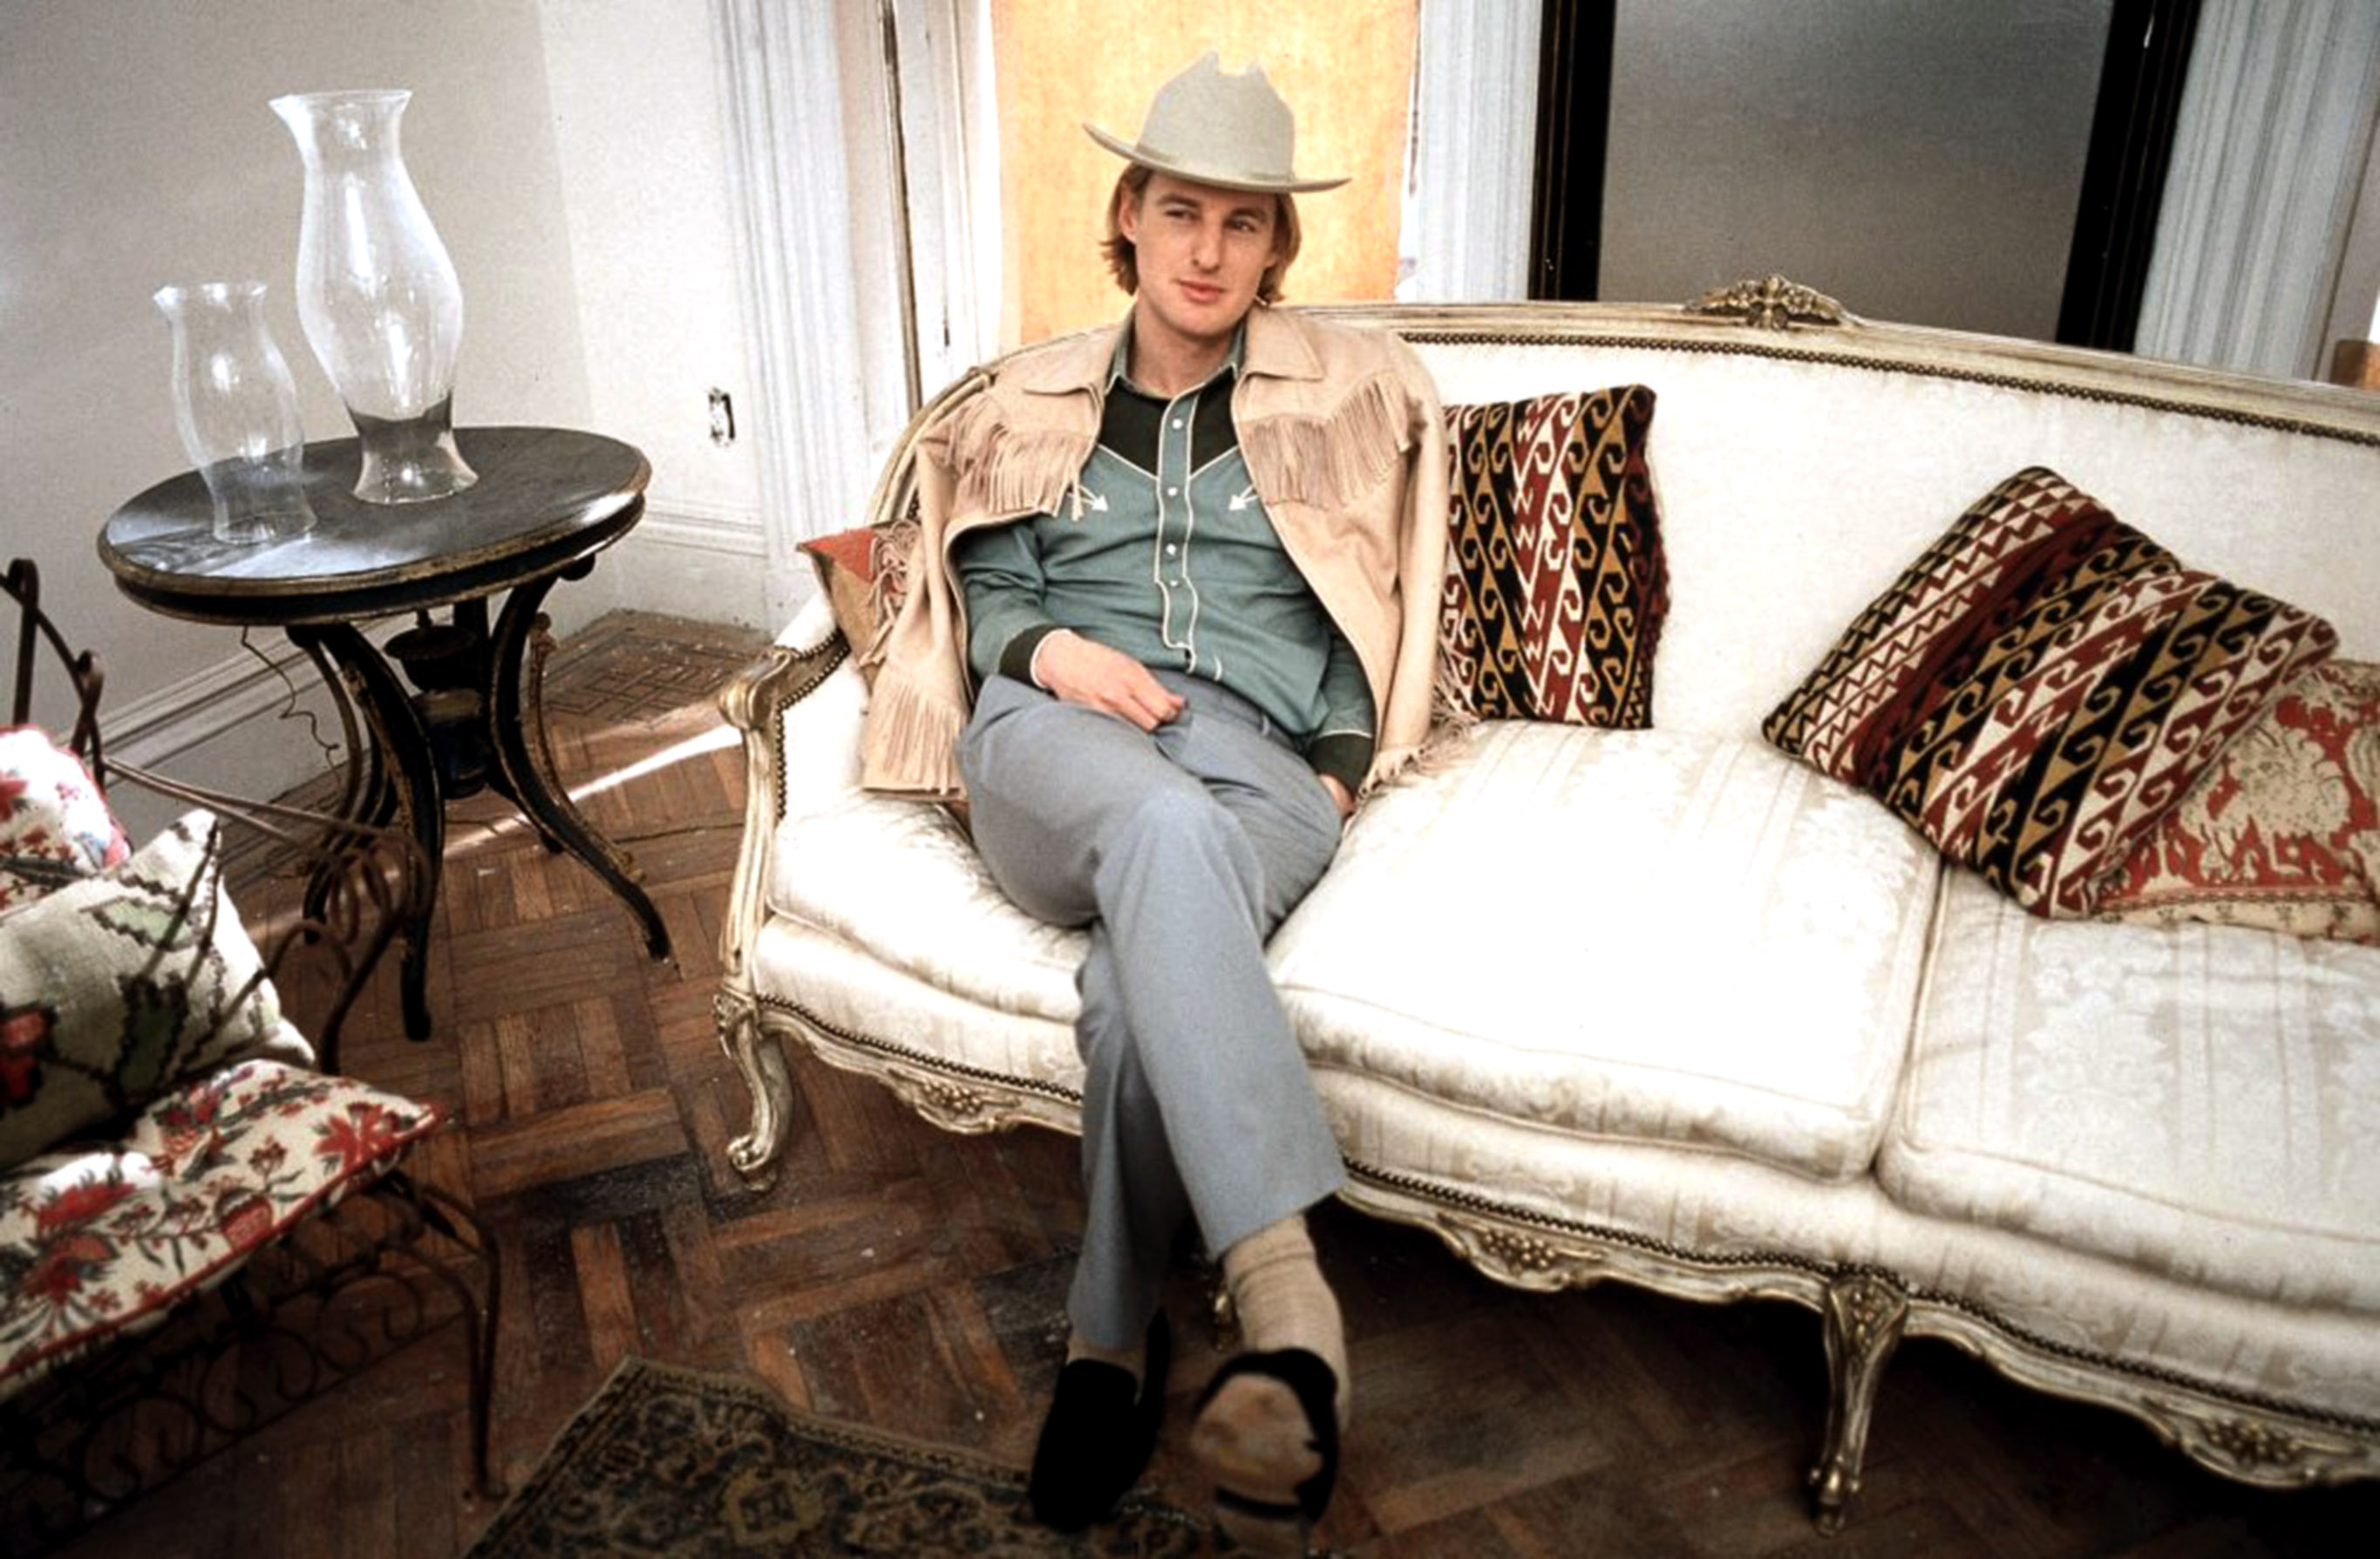 Owen Wilson in a cowboy hat on the couch.